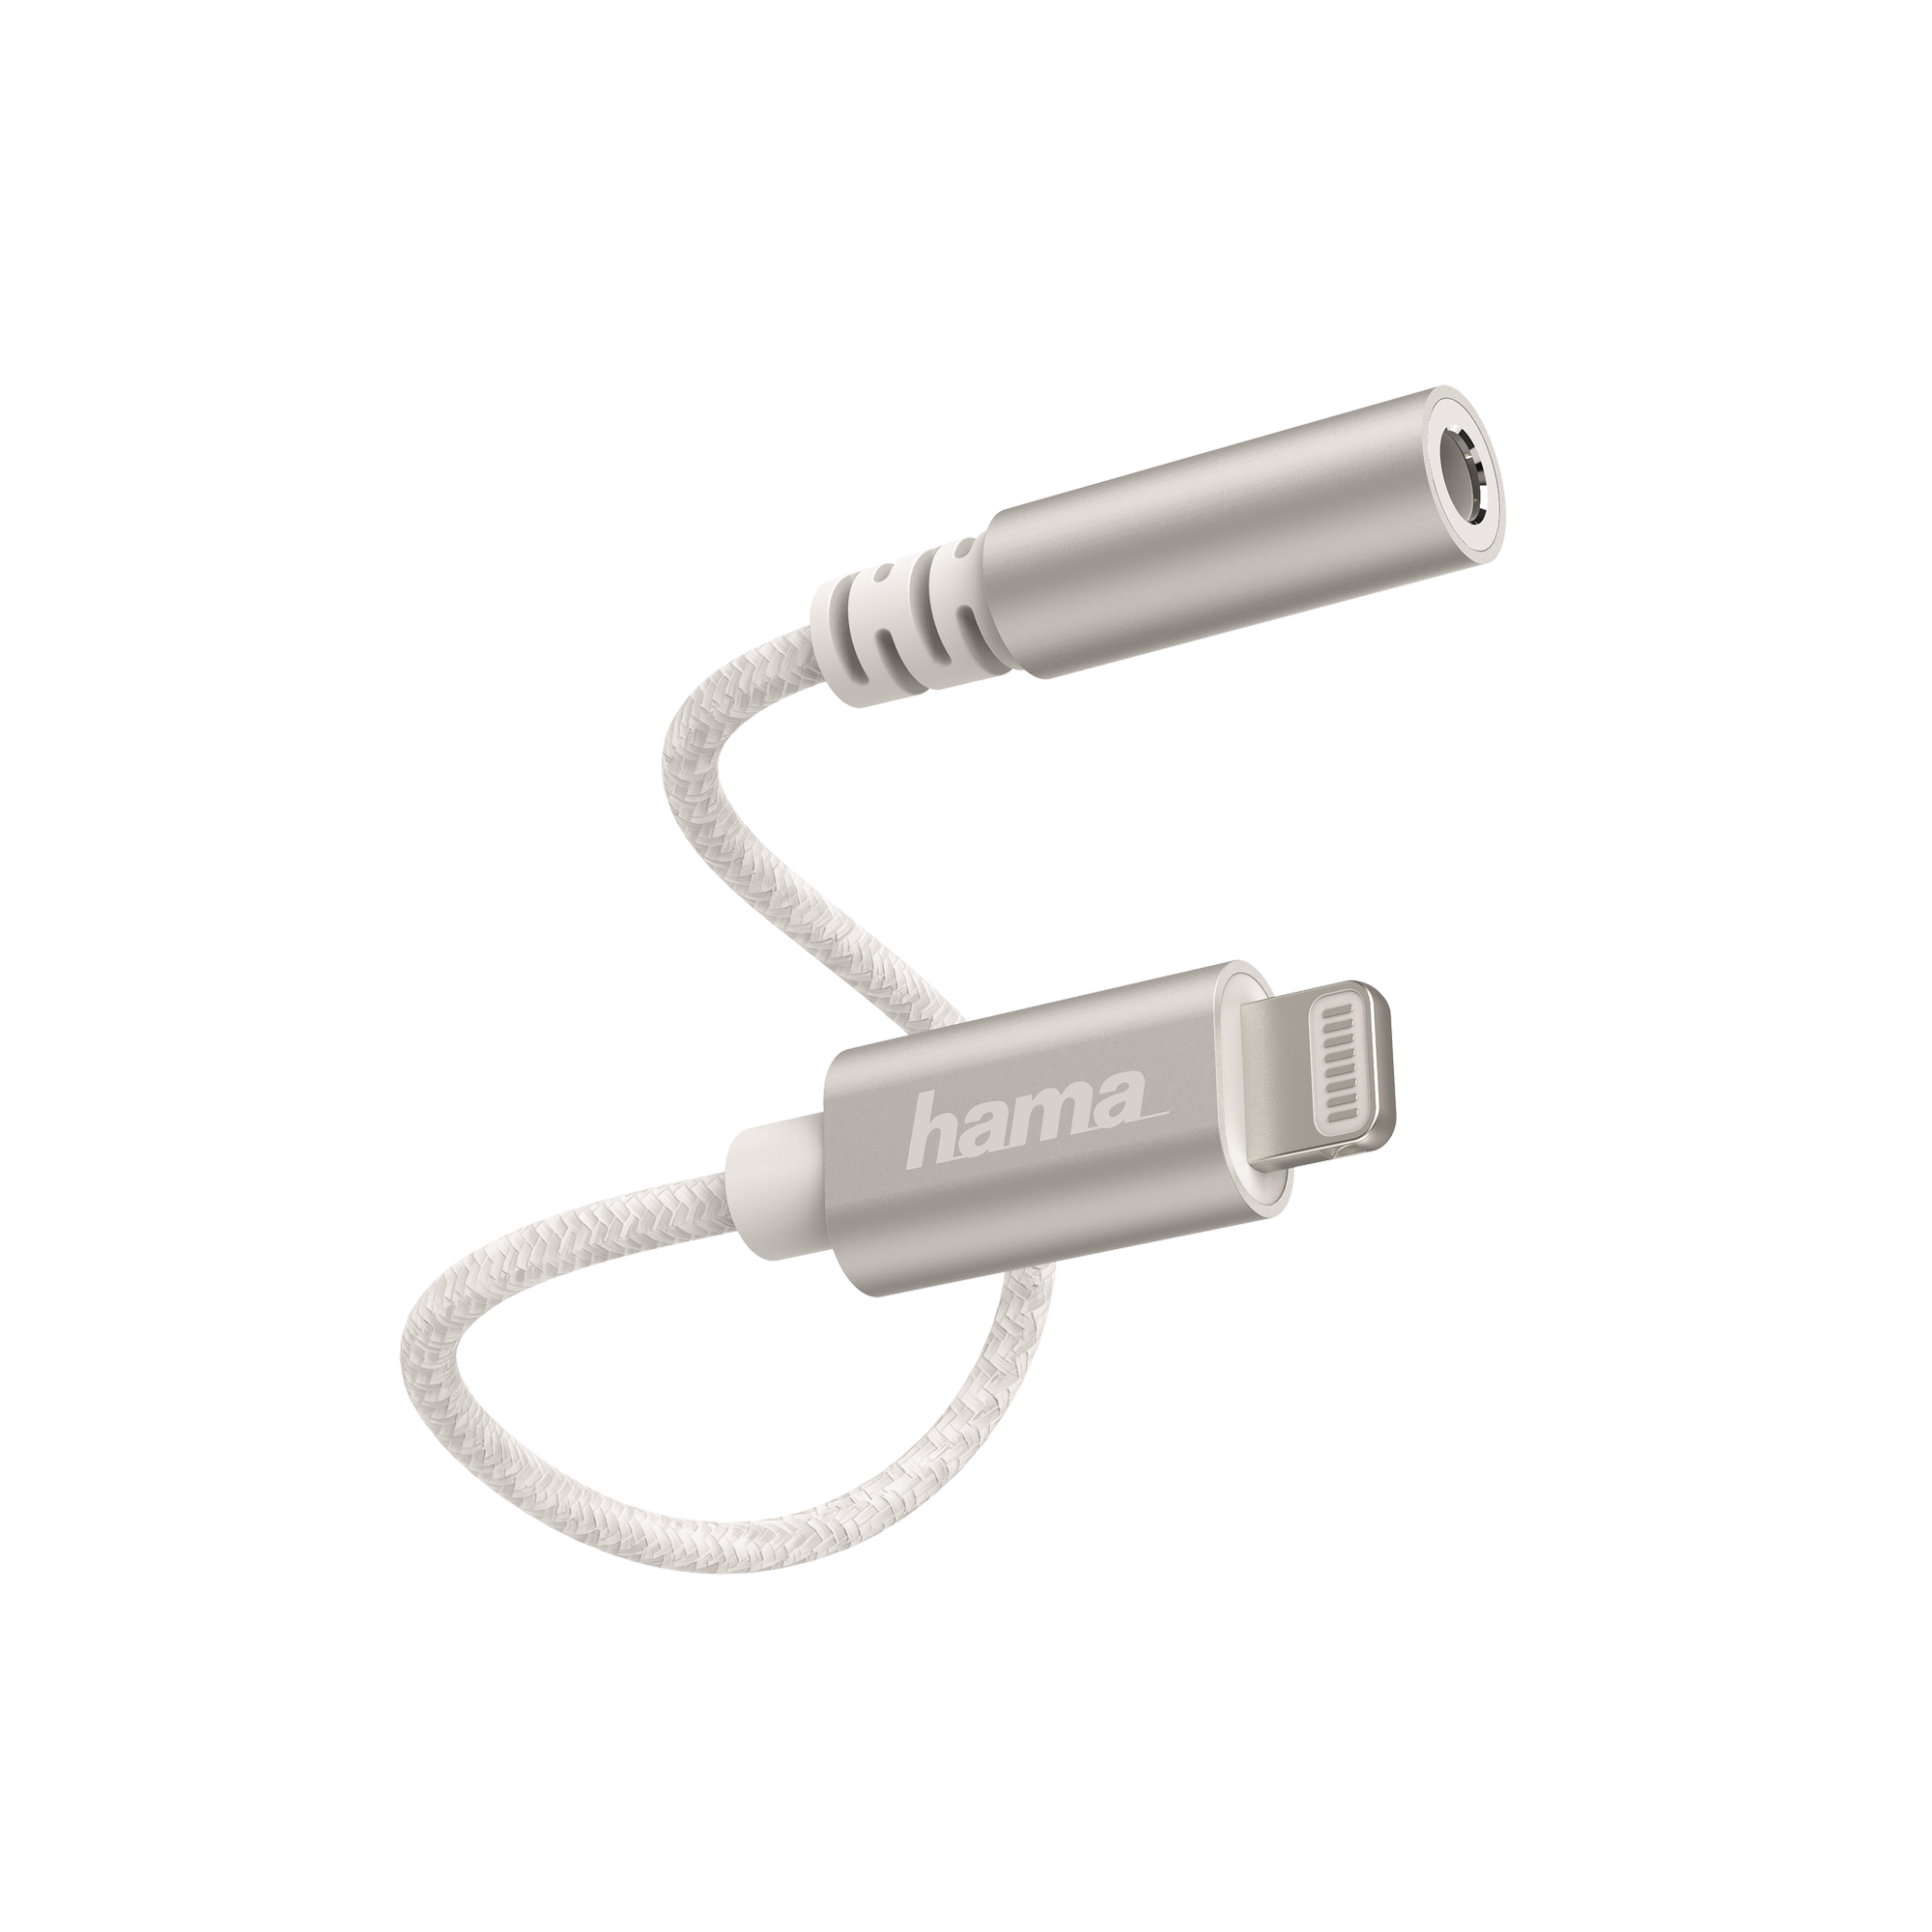 Lightning-Adapter auf 3,5 mm Audiobuchse weiß + product picture